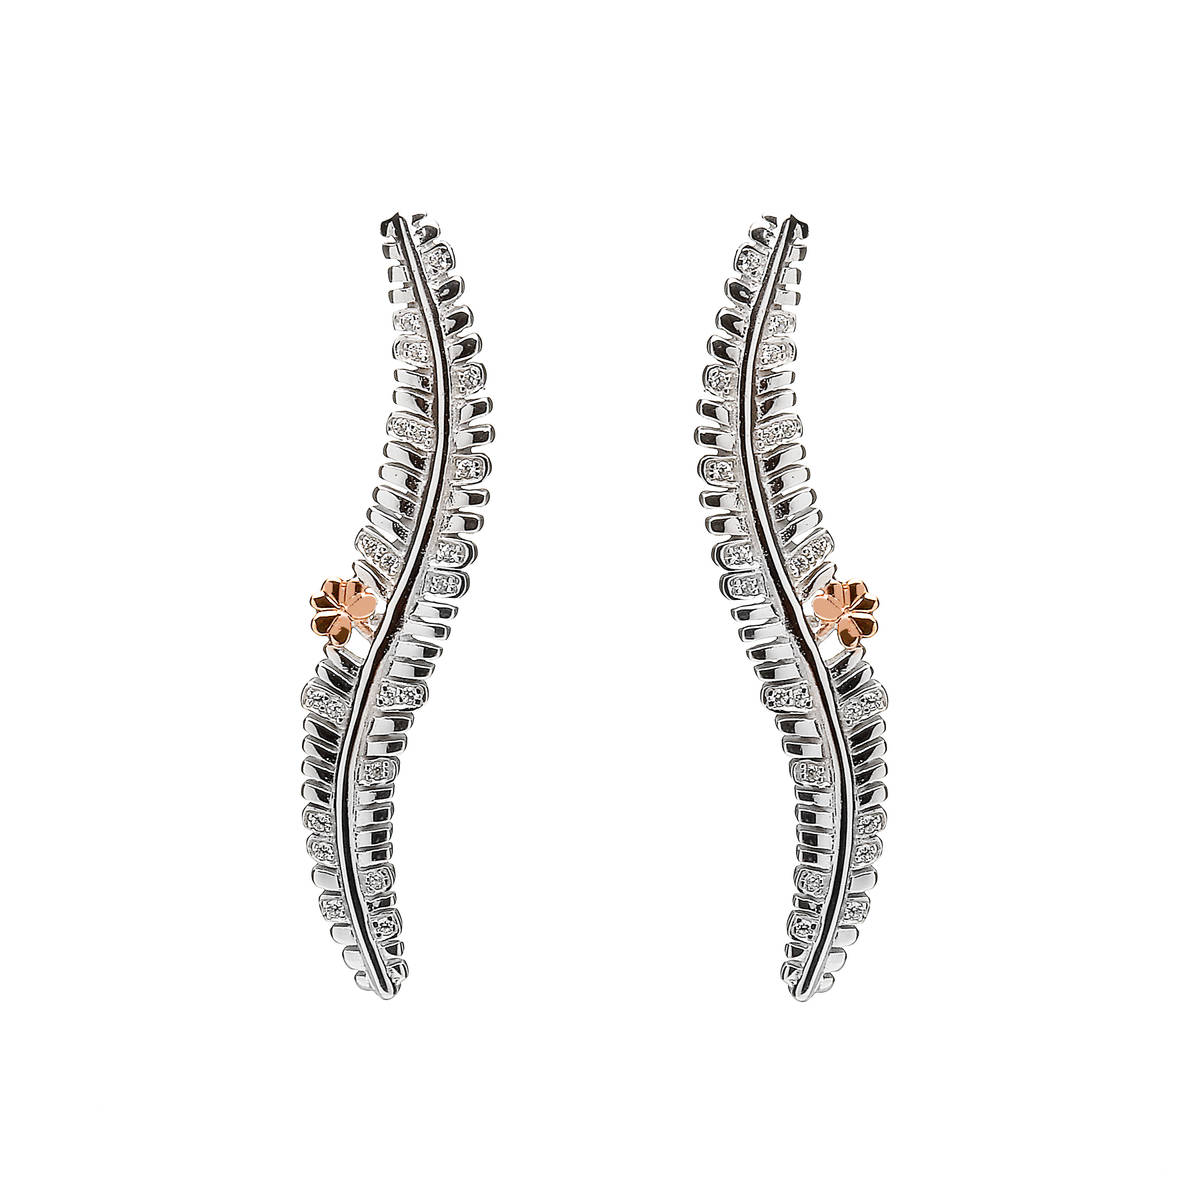 House of Lor silver fern earrings with rose gold Shamrock made from rare Irish goldpick/dapck